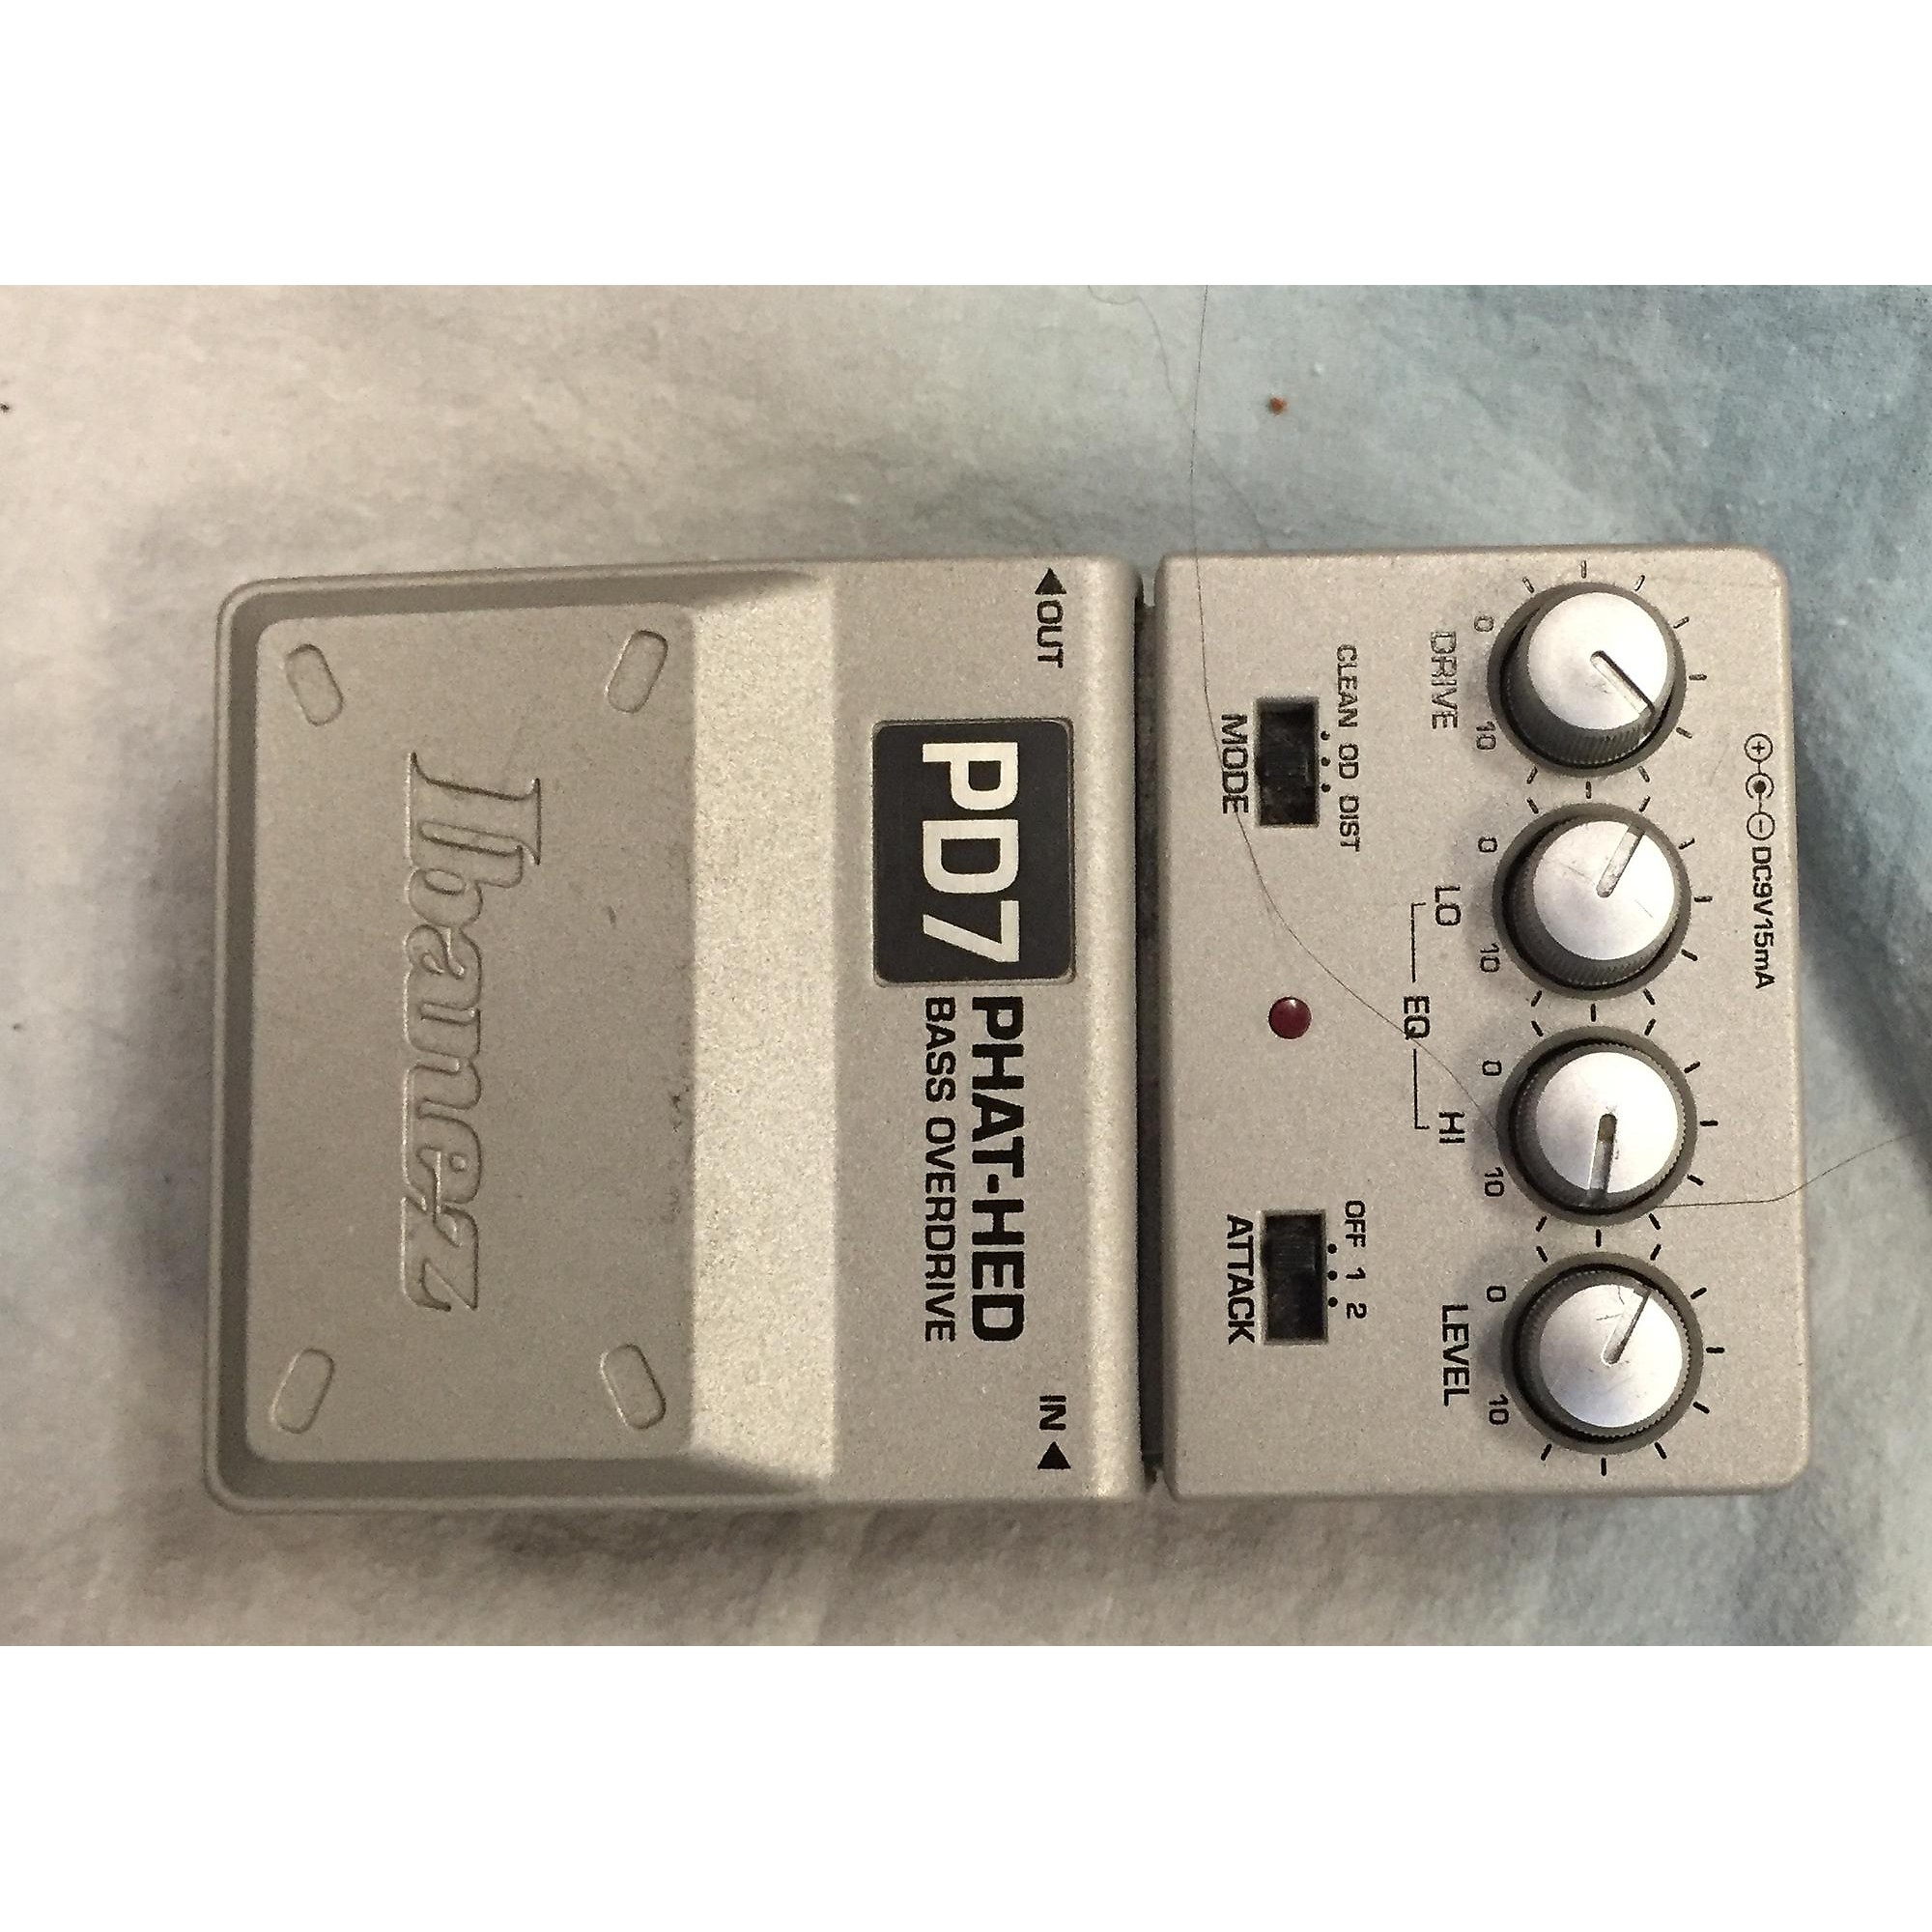 Used Ibanez PD7 PHAT HEAD BASS OVERDRIVE Bass Effect Pedal